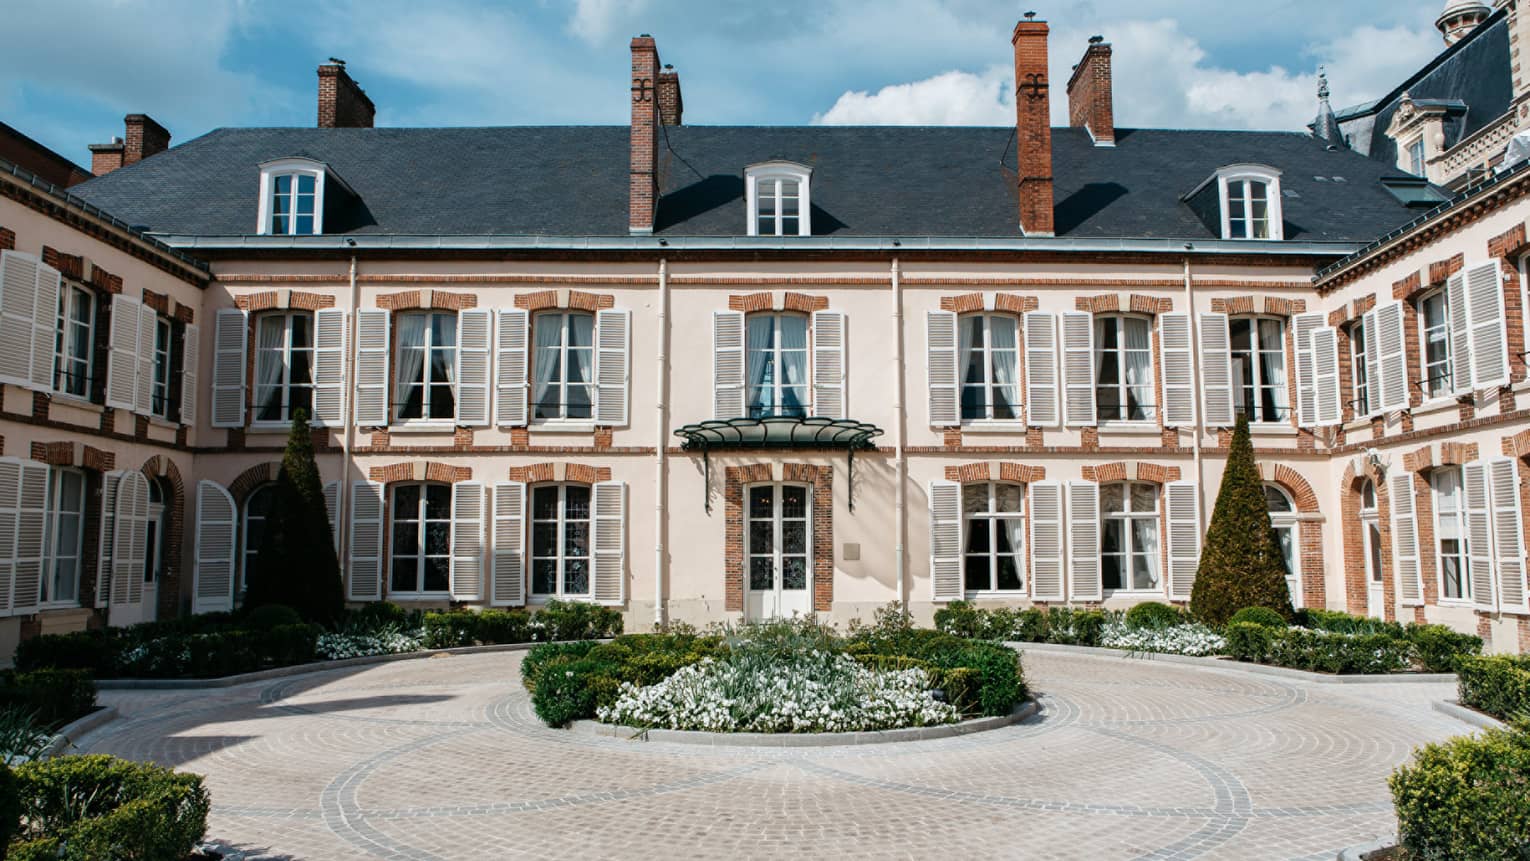 Rear courtyard view of the Maison Belle �poque 19th-century mansion